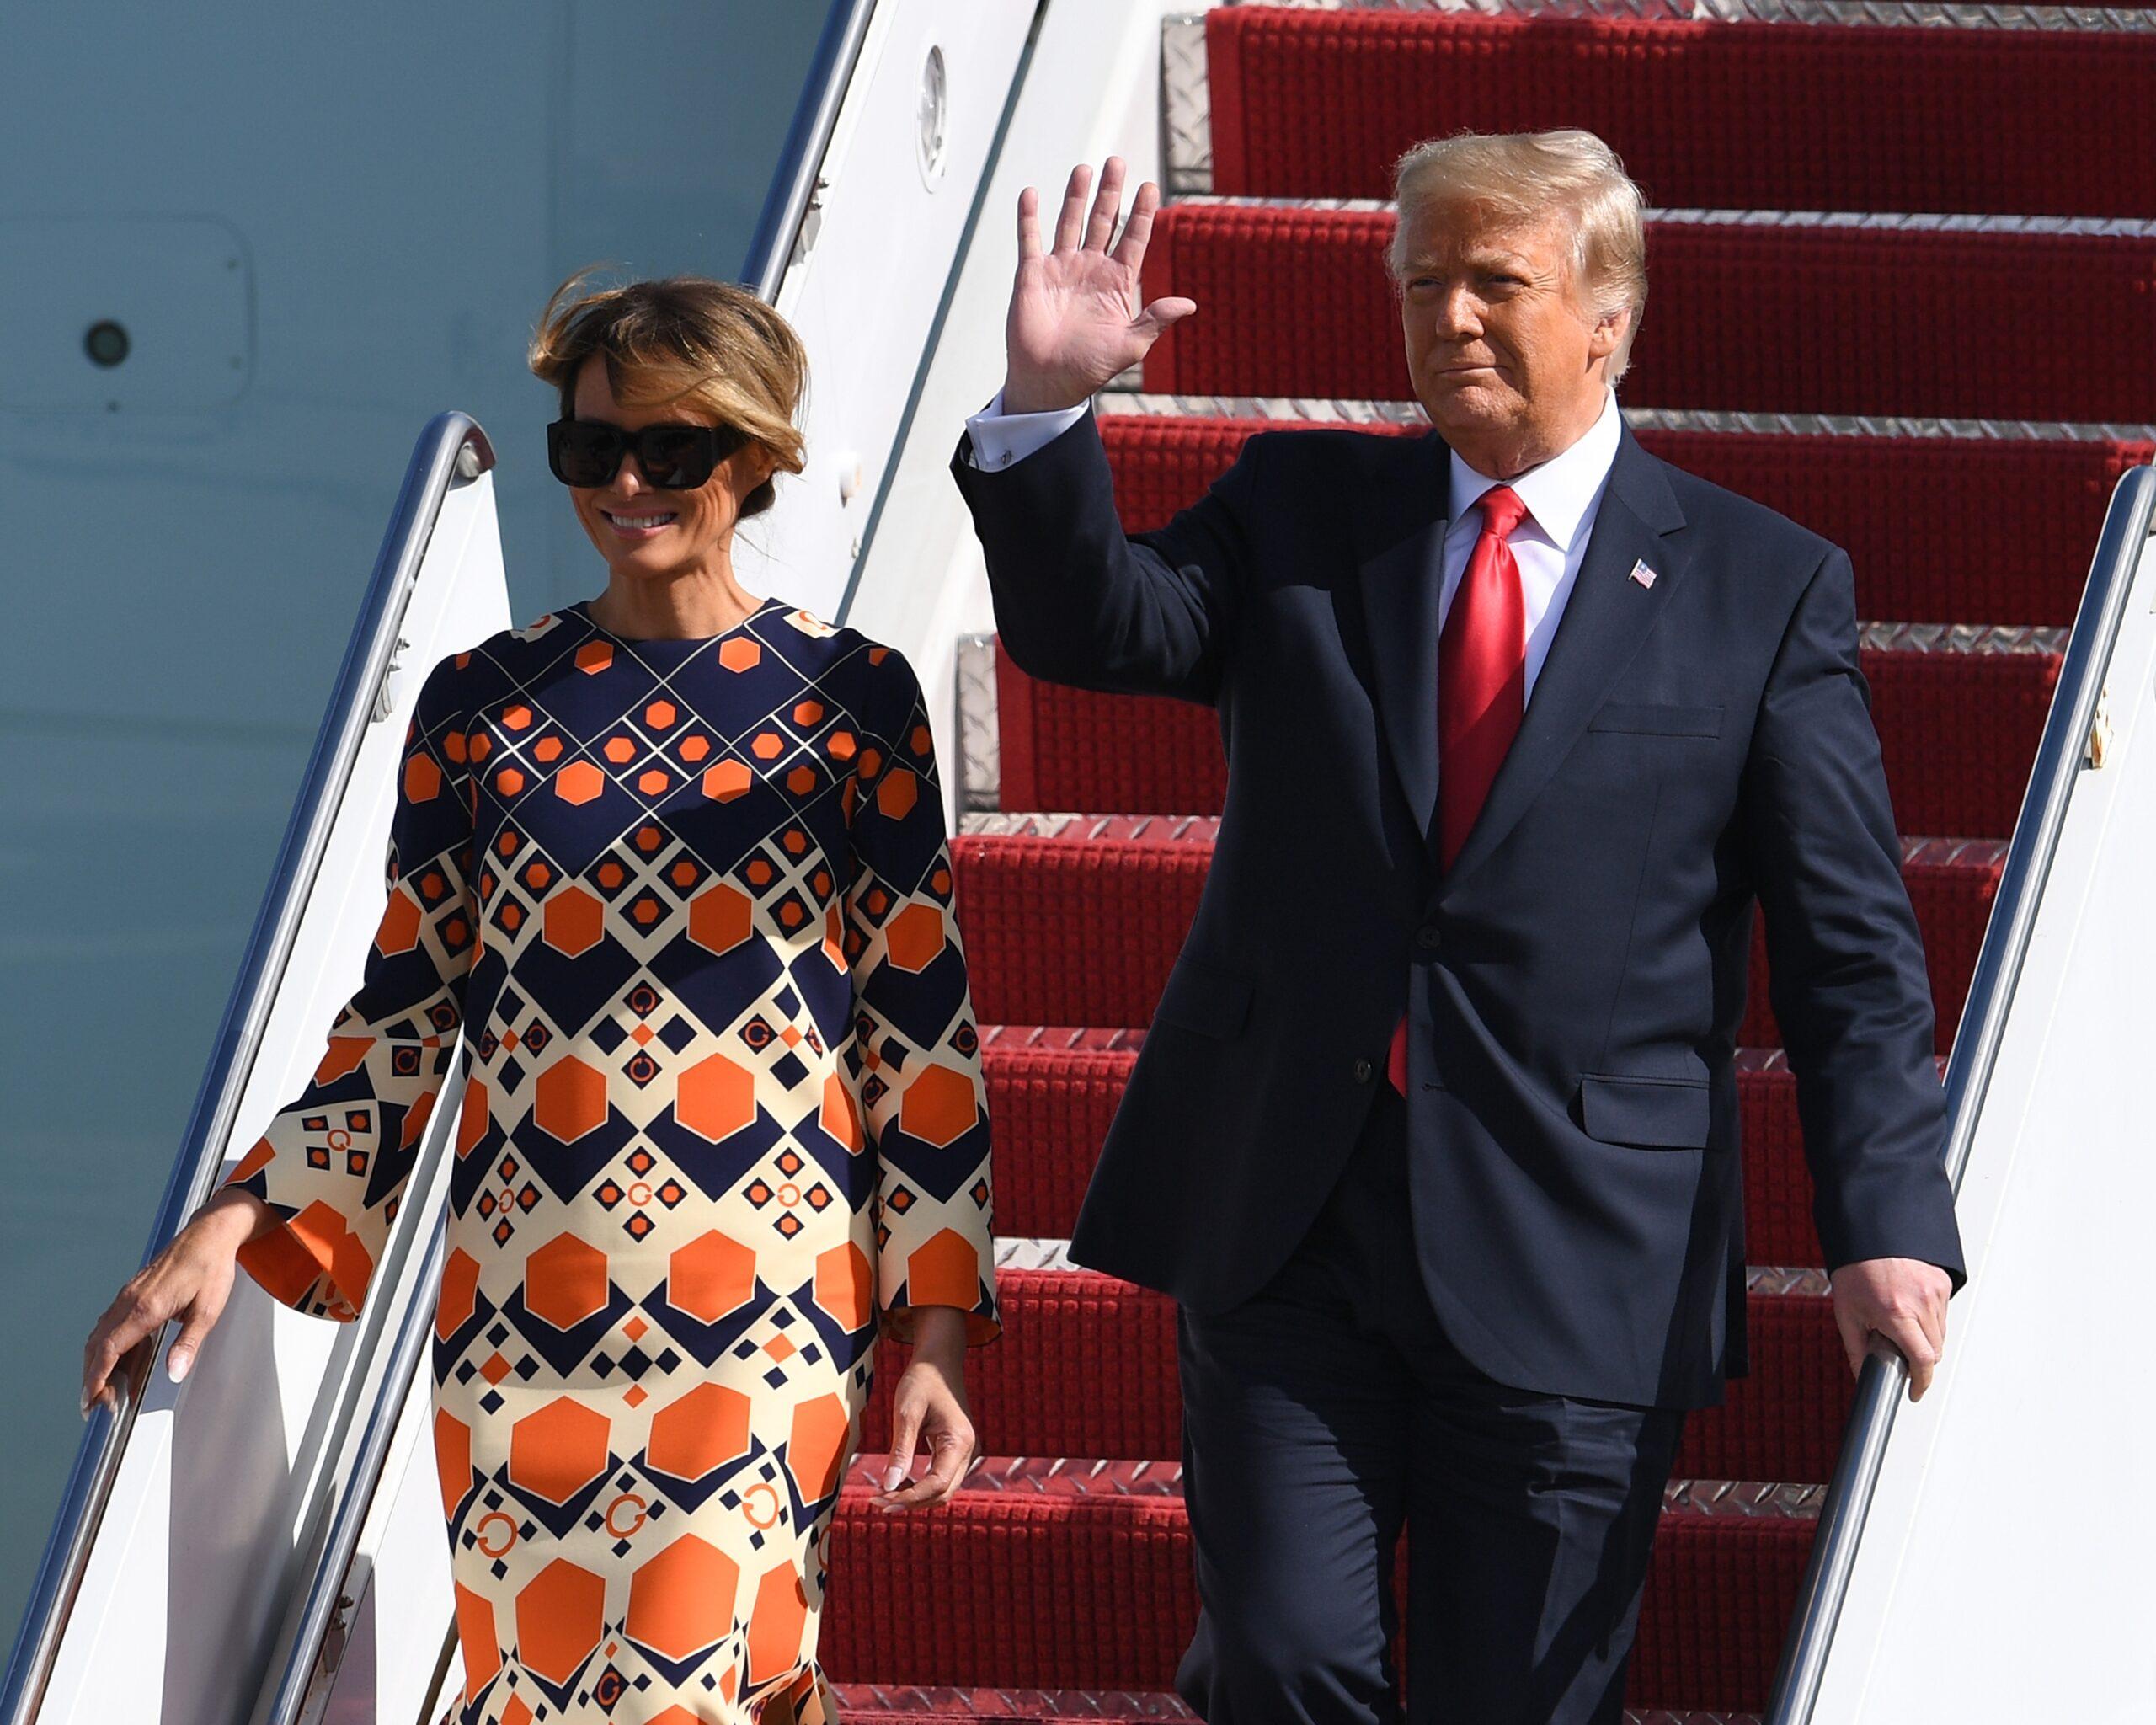 US President Donald Trump and First Lady Melania Trump are seen driving away in the motorcade after arriving on Air Force One at Palm Beach International Airport